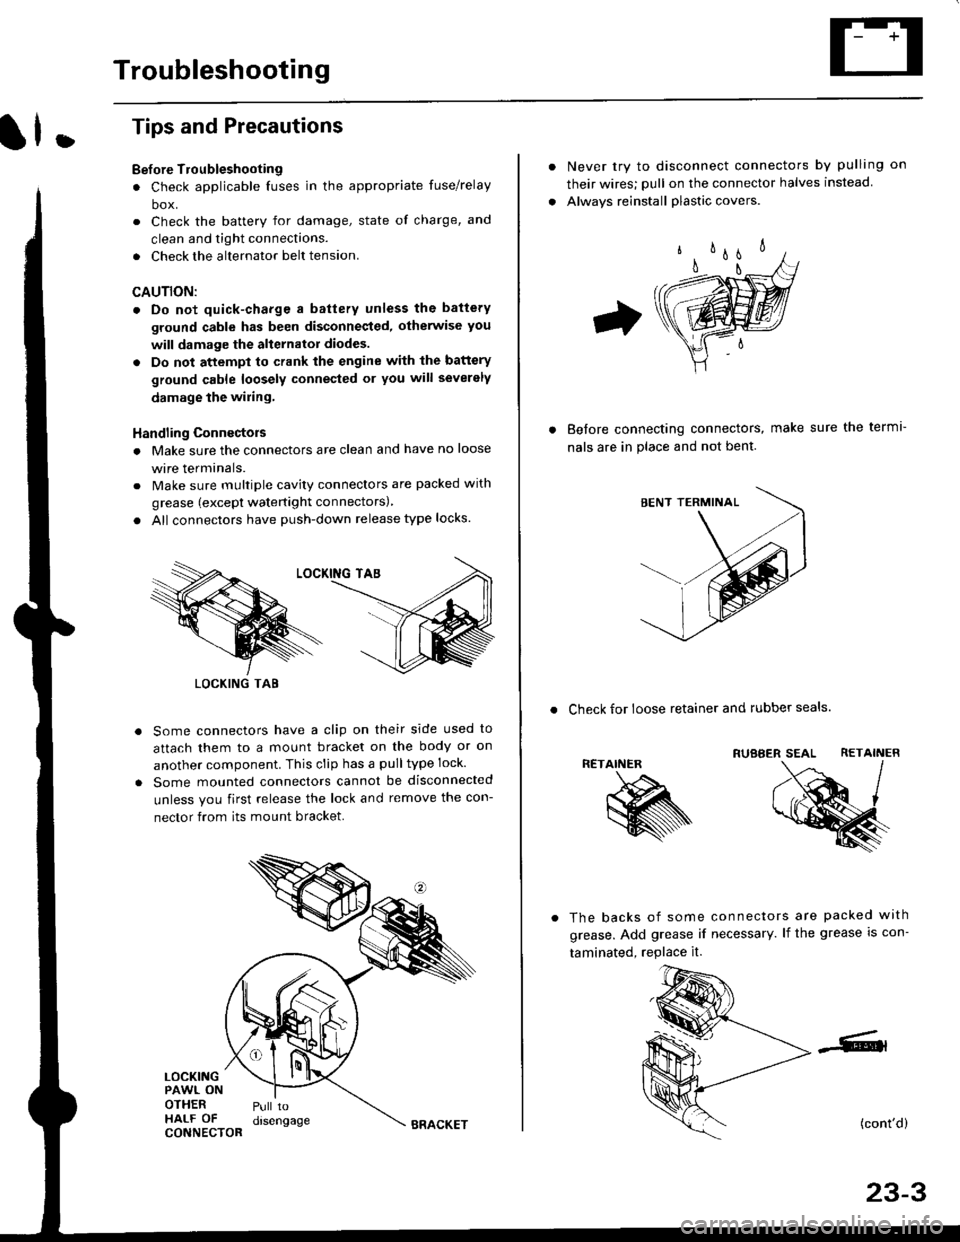 HONDA CIVIC 1996 6.G Repair Manual Troubleshooting
ll.
Tips and Precautions
Bef ore Troubleshooting
. Check applicable fuses in the appropriate fuse/relay
box.
. Check the battery for damage, state of charge, and
clean and tight connec